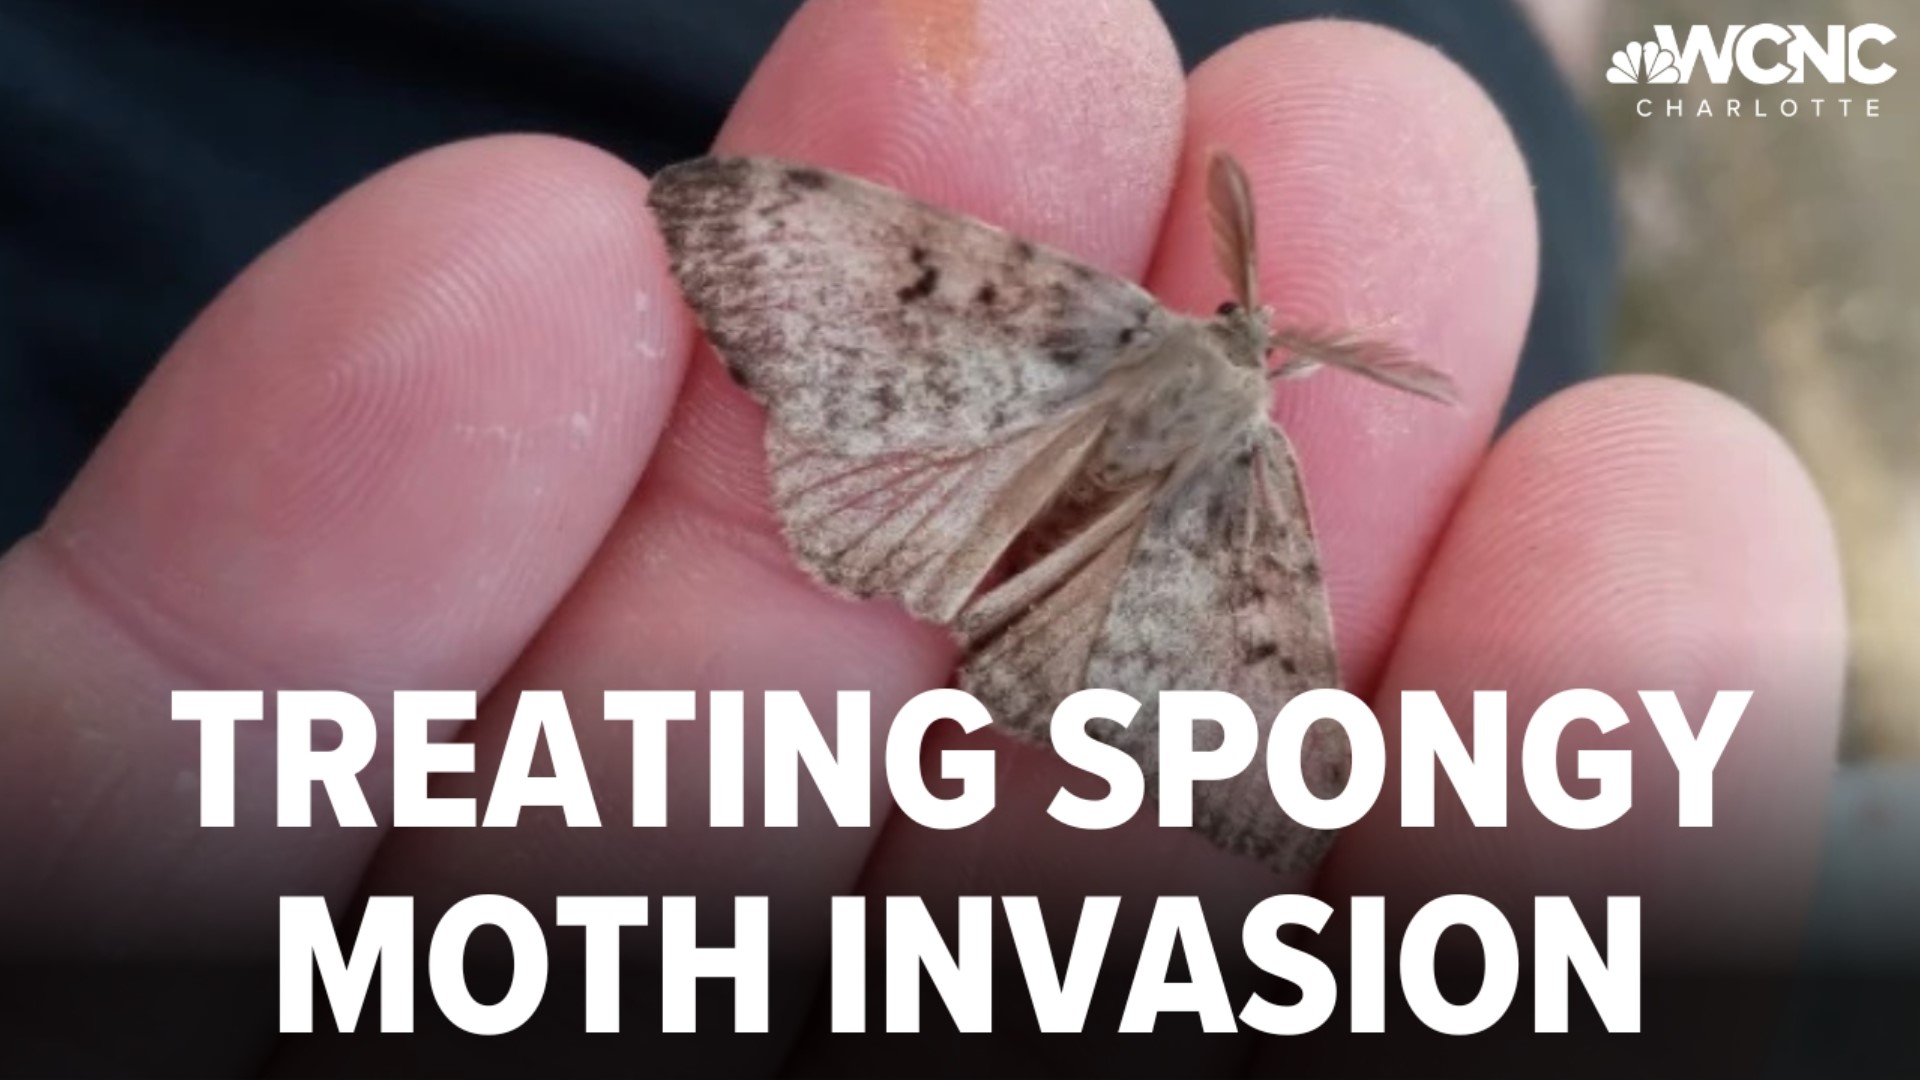 Spongy moths, an invasive species that feeds off foliage, are making their way to North Carolina. And it could spell disaster for our beloved forests.